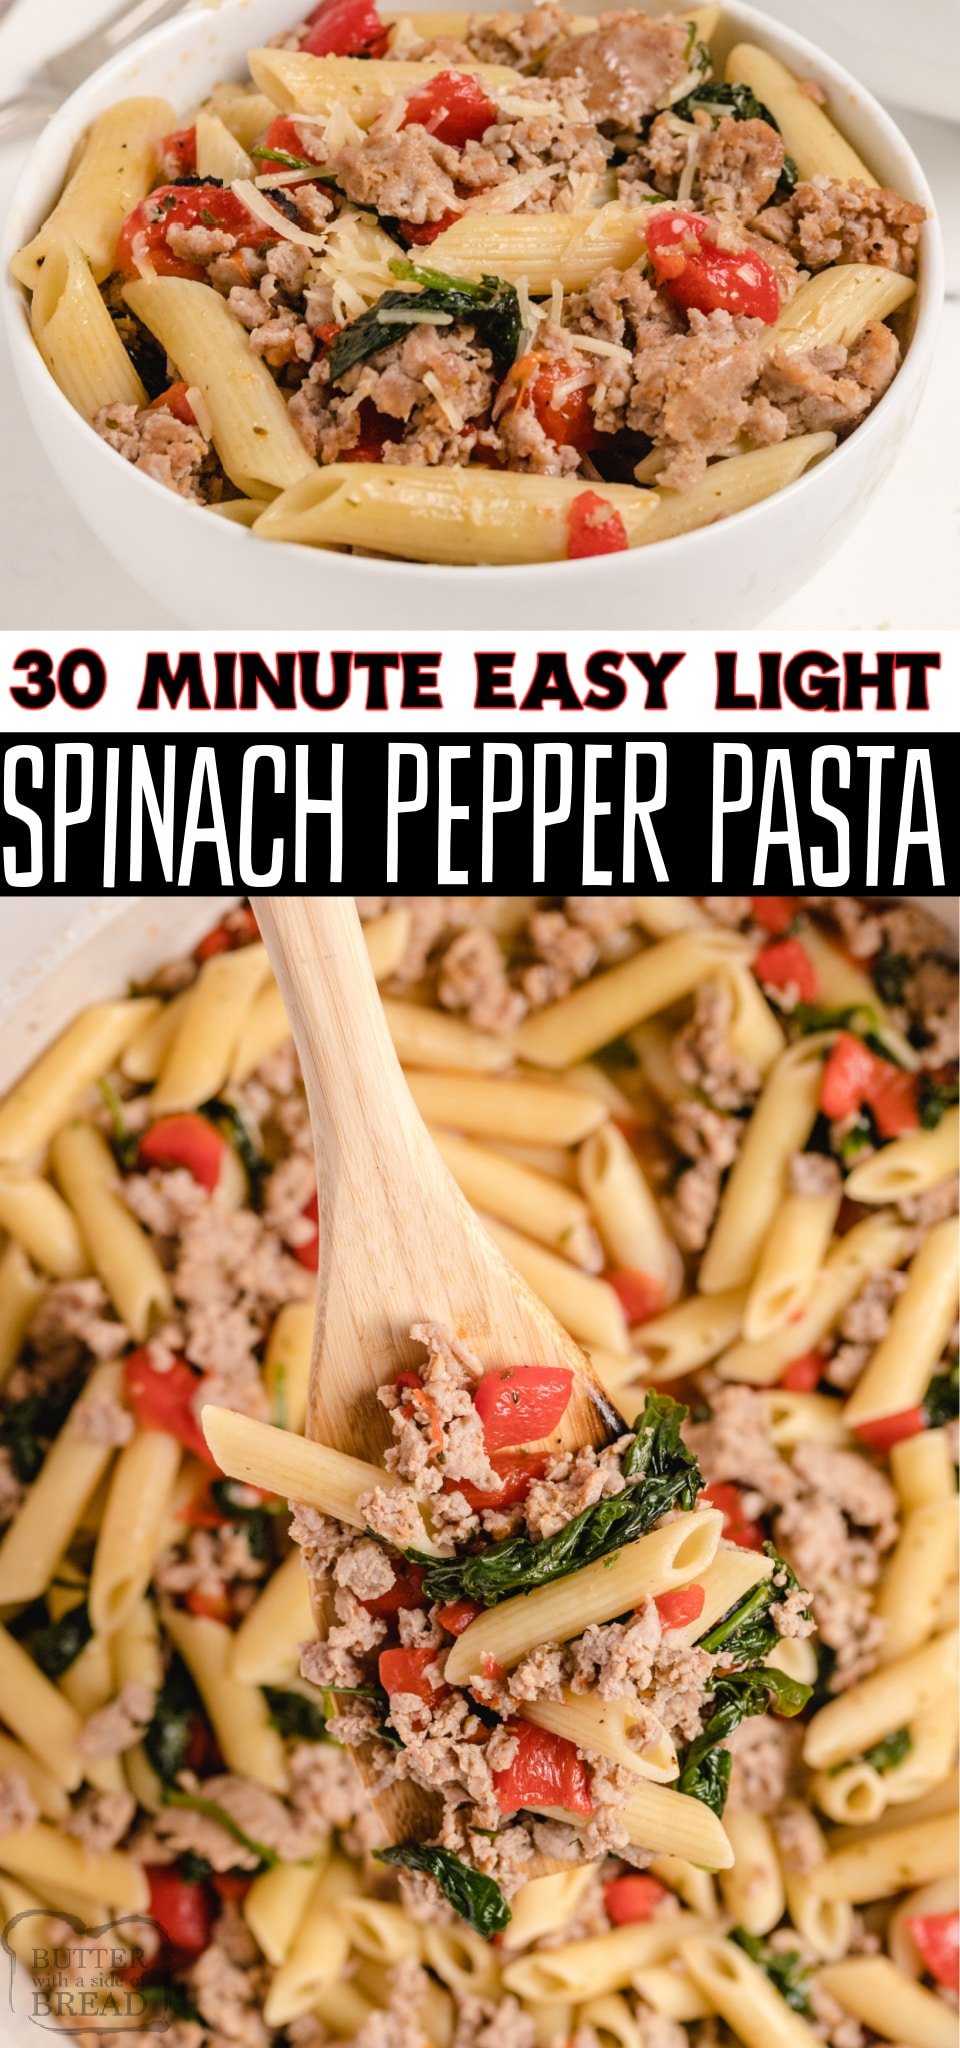 Light Spinach, Sausage & Pepper Pasta made easy in 30 minutes & so flavorful! Simple pasta recipe with turkey Italian sausage perfect for weeknight dinners. #pasta #light #lowcal #lowfat #healthy #dinner #easyrecipe from BUTTER WITH A SIDE OF BREAD